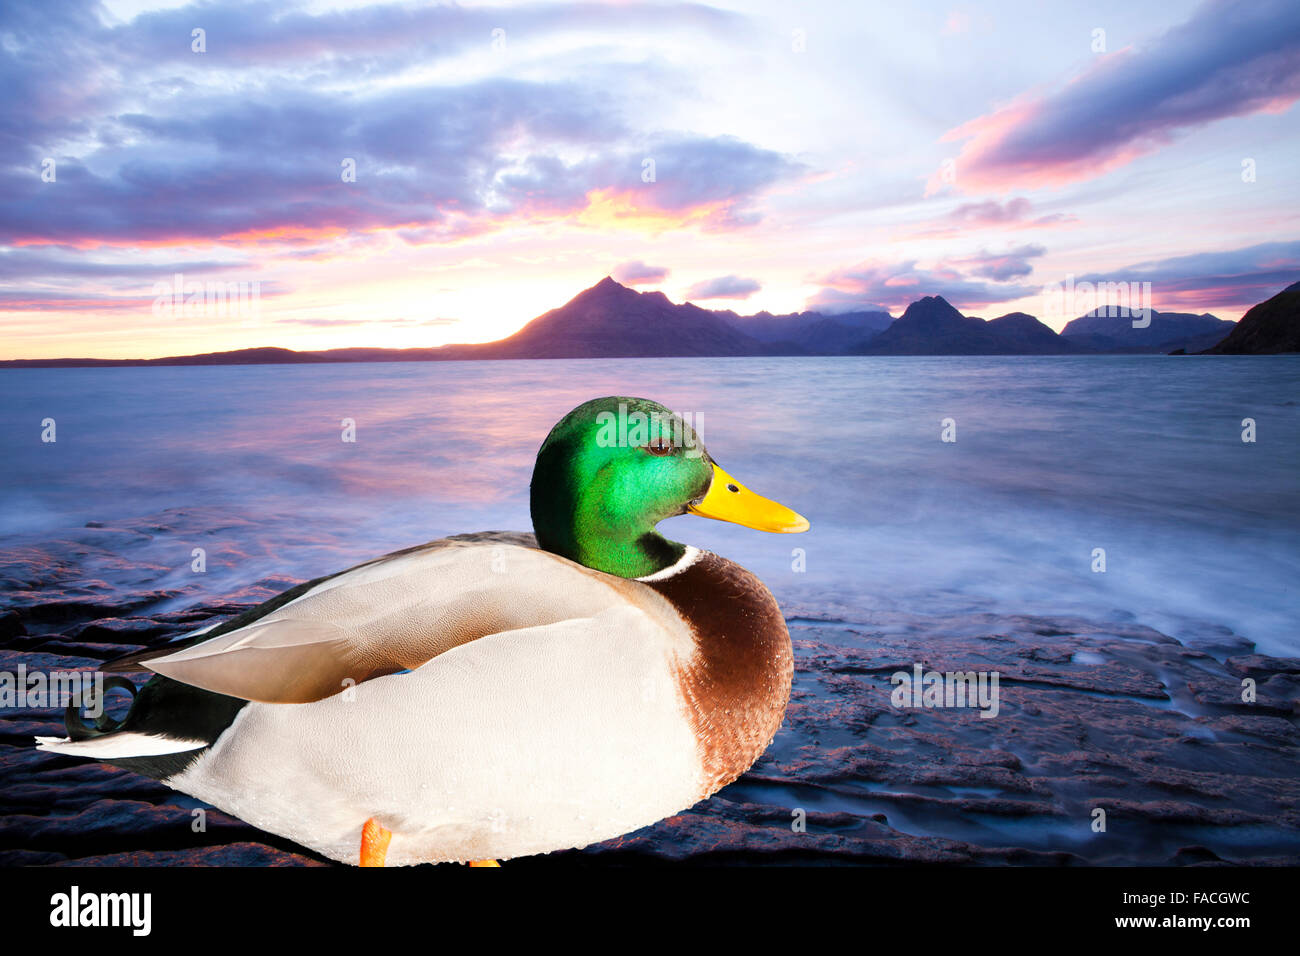 The Cuillin Ridge on the Isle of Skye, Scotland, UK, from Elgol, at sunset, with a Mallard in the foreground. Stock Photo